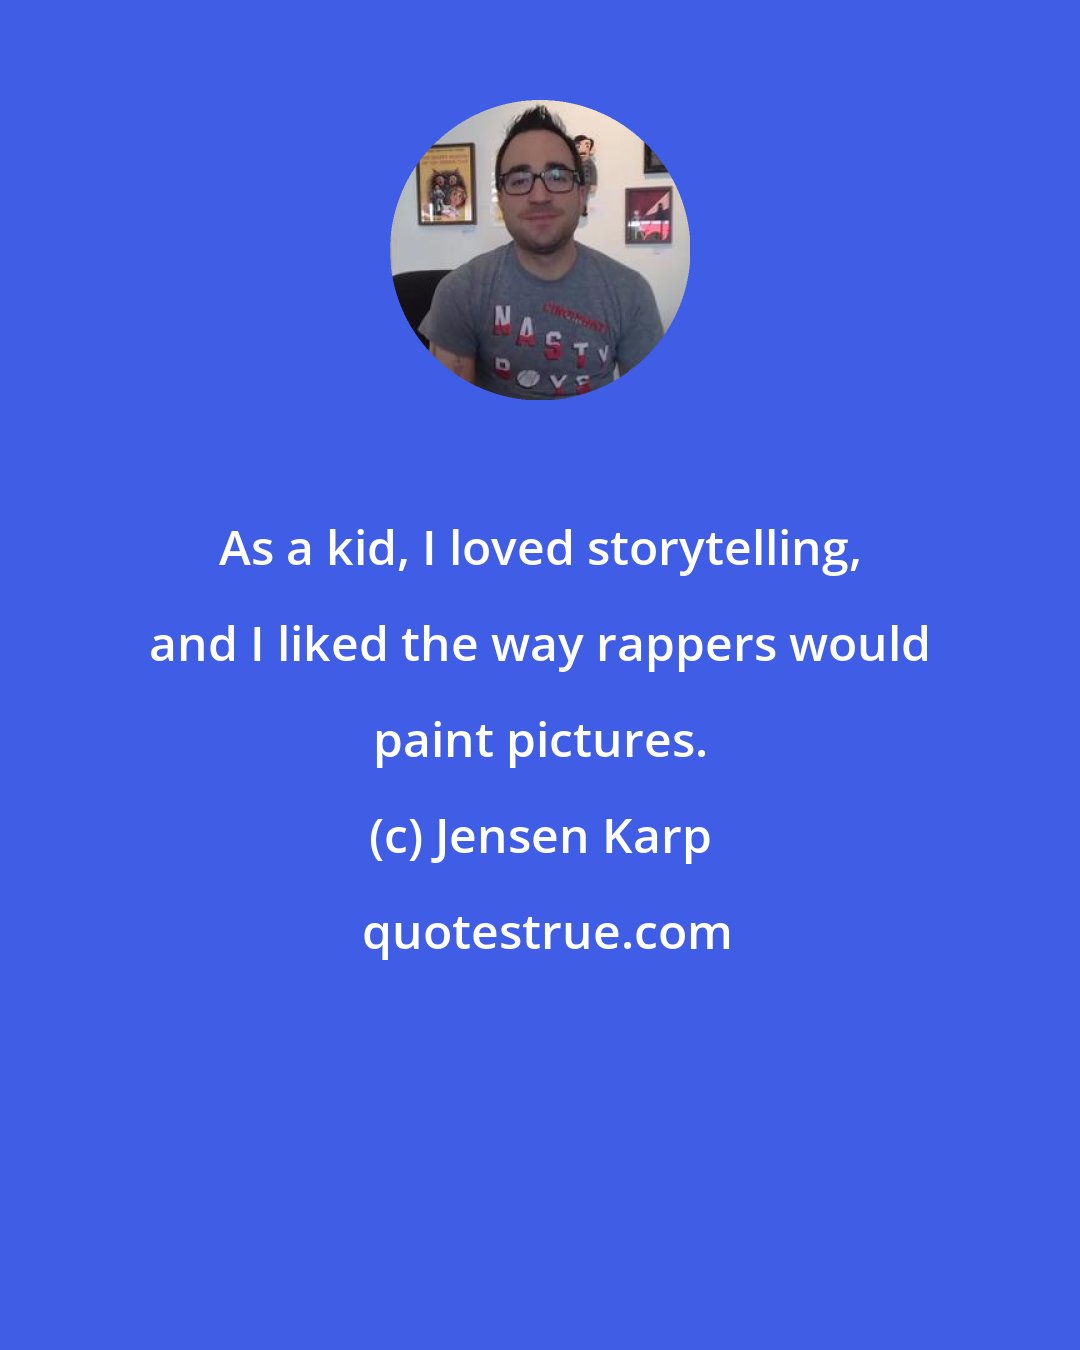 Jensen Karp: As a kid, I loved storytelling, and I liked the way rappers would paint pictures.